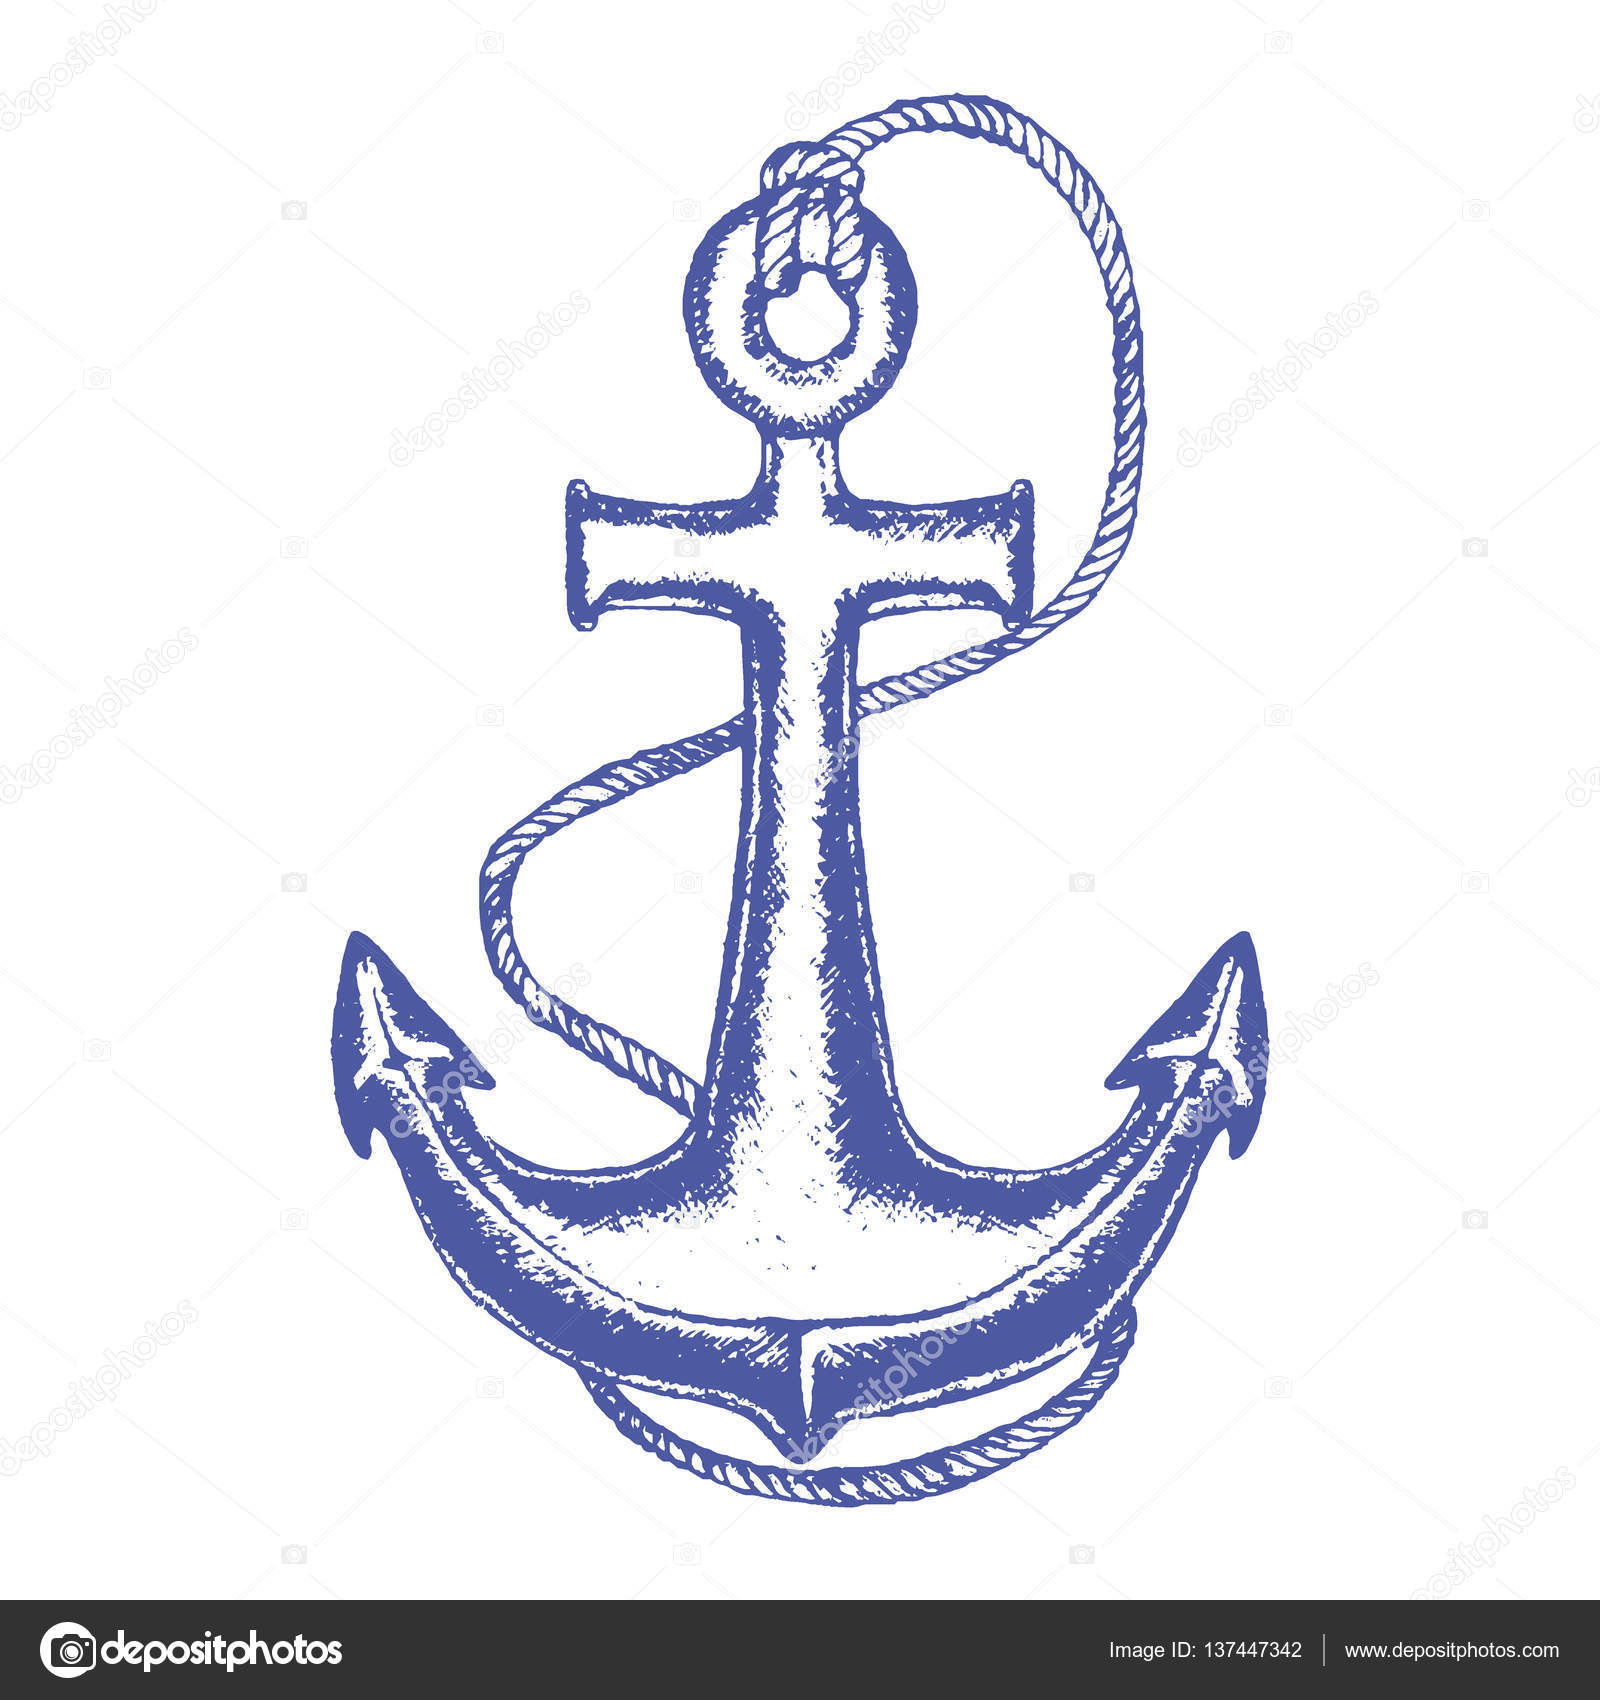 Ship anchor with rope clipart set. Digital images or vector graphics for  commercial and personal use.